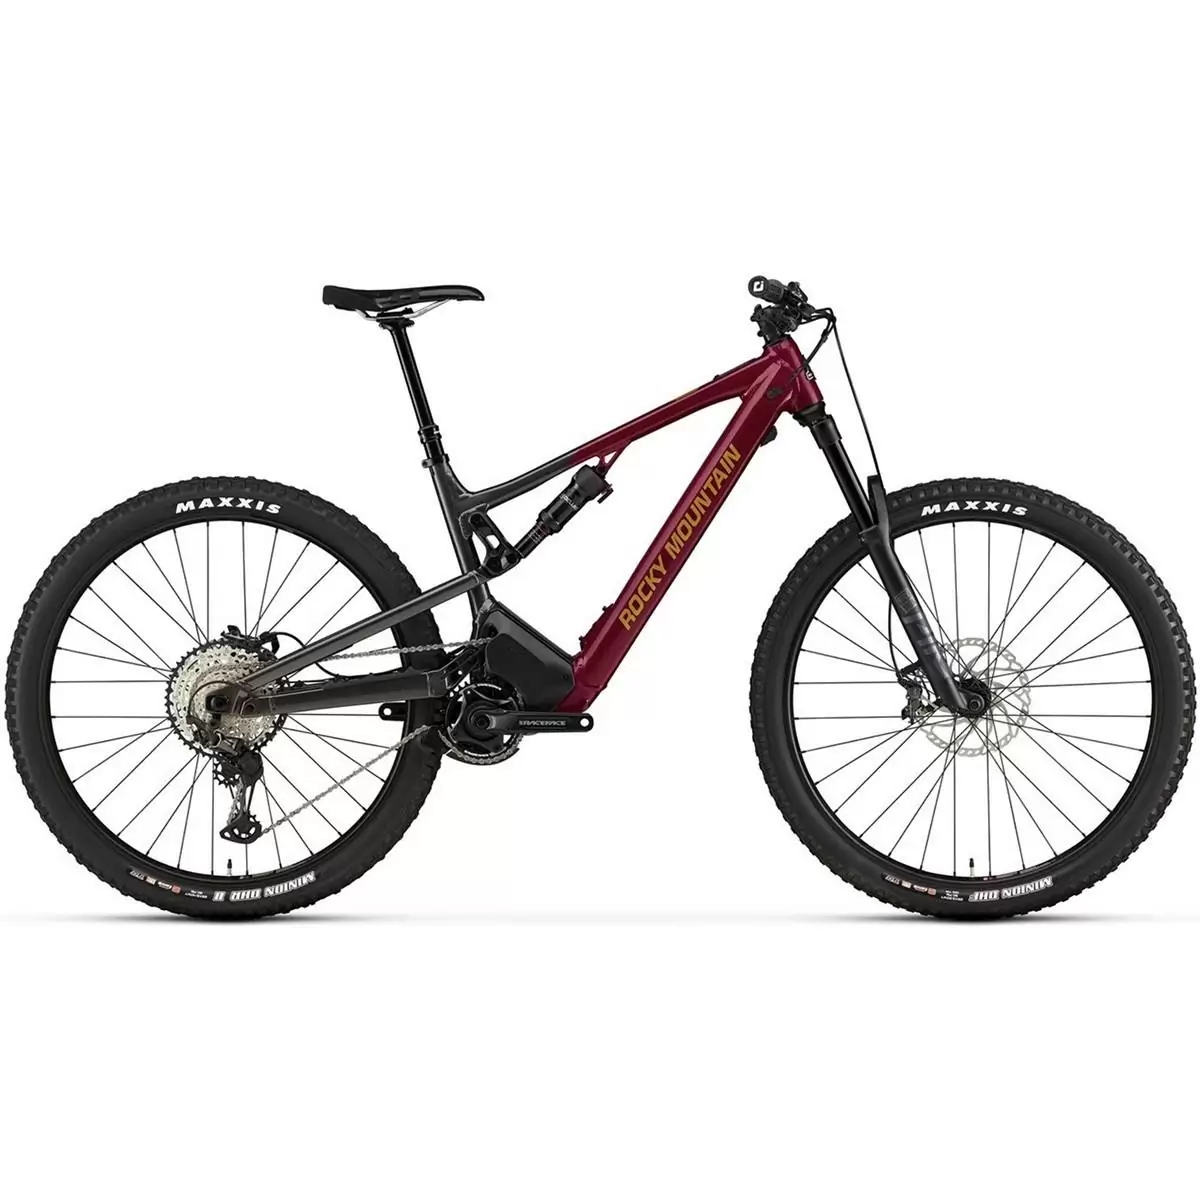 Instinct PowerPlay Alloy 70 29'' 150mm 12s 720Wh Grey/Red Size M - image